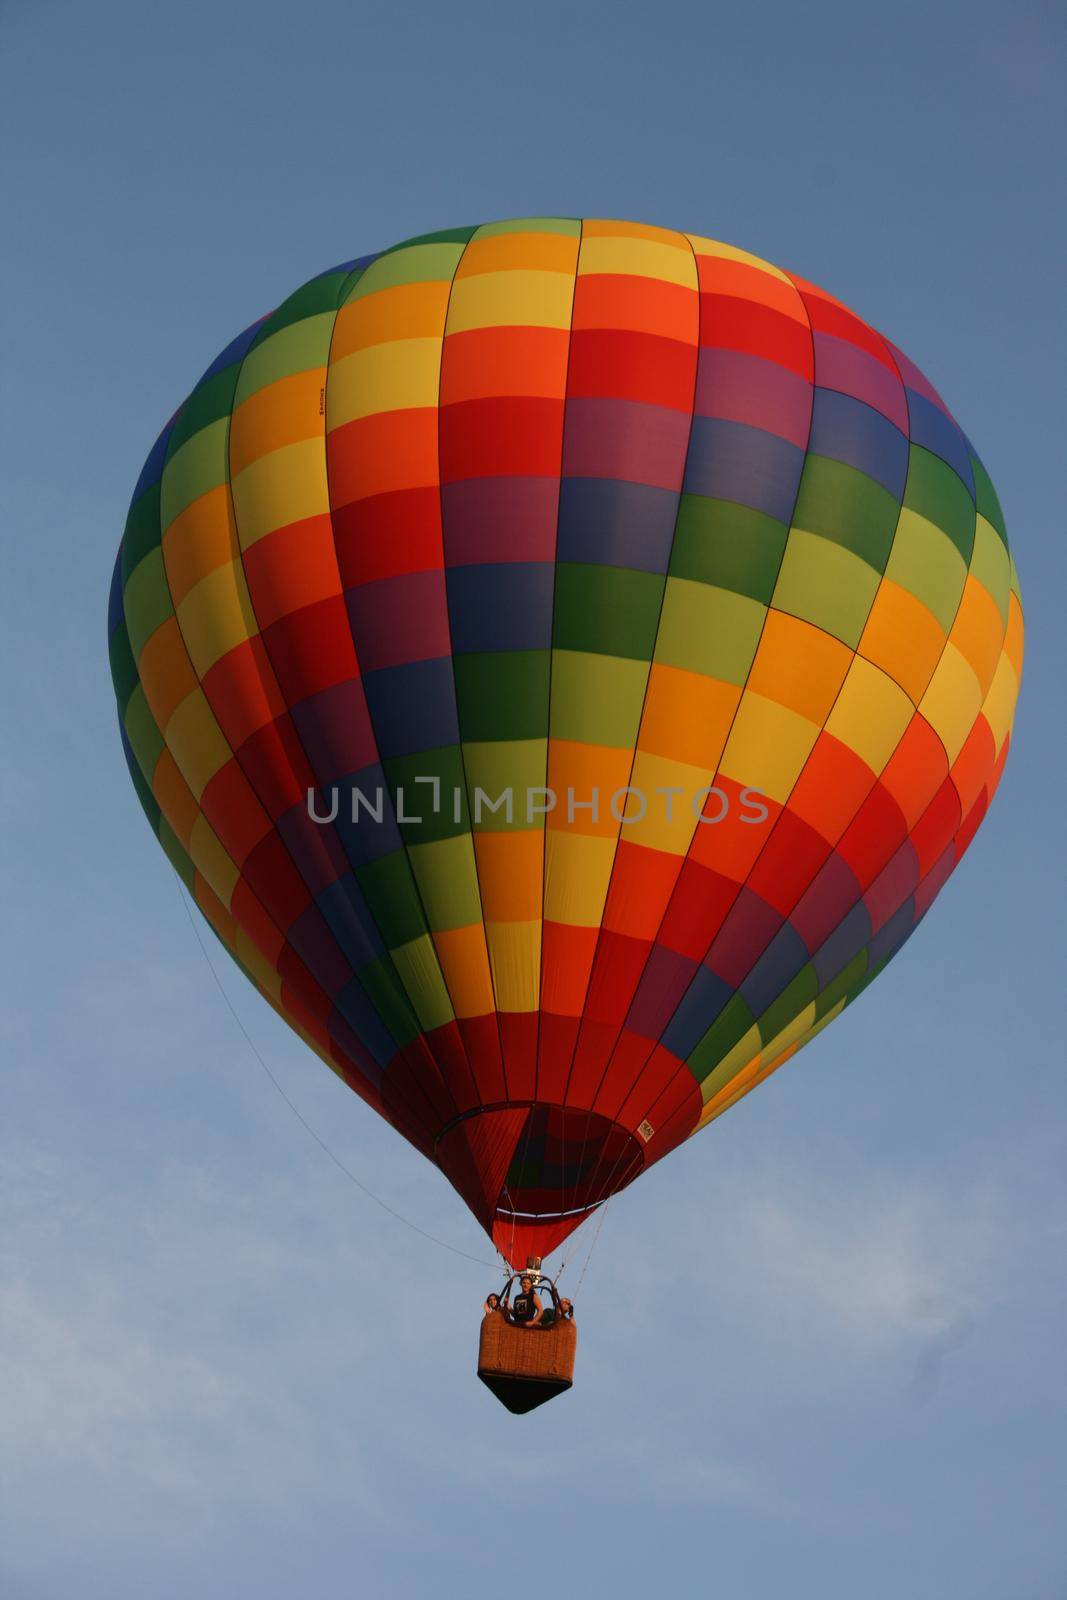 A hot air balloon with rainbow squares pattern flying in a cloudy sky by njproductions